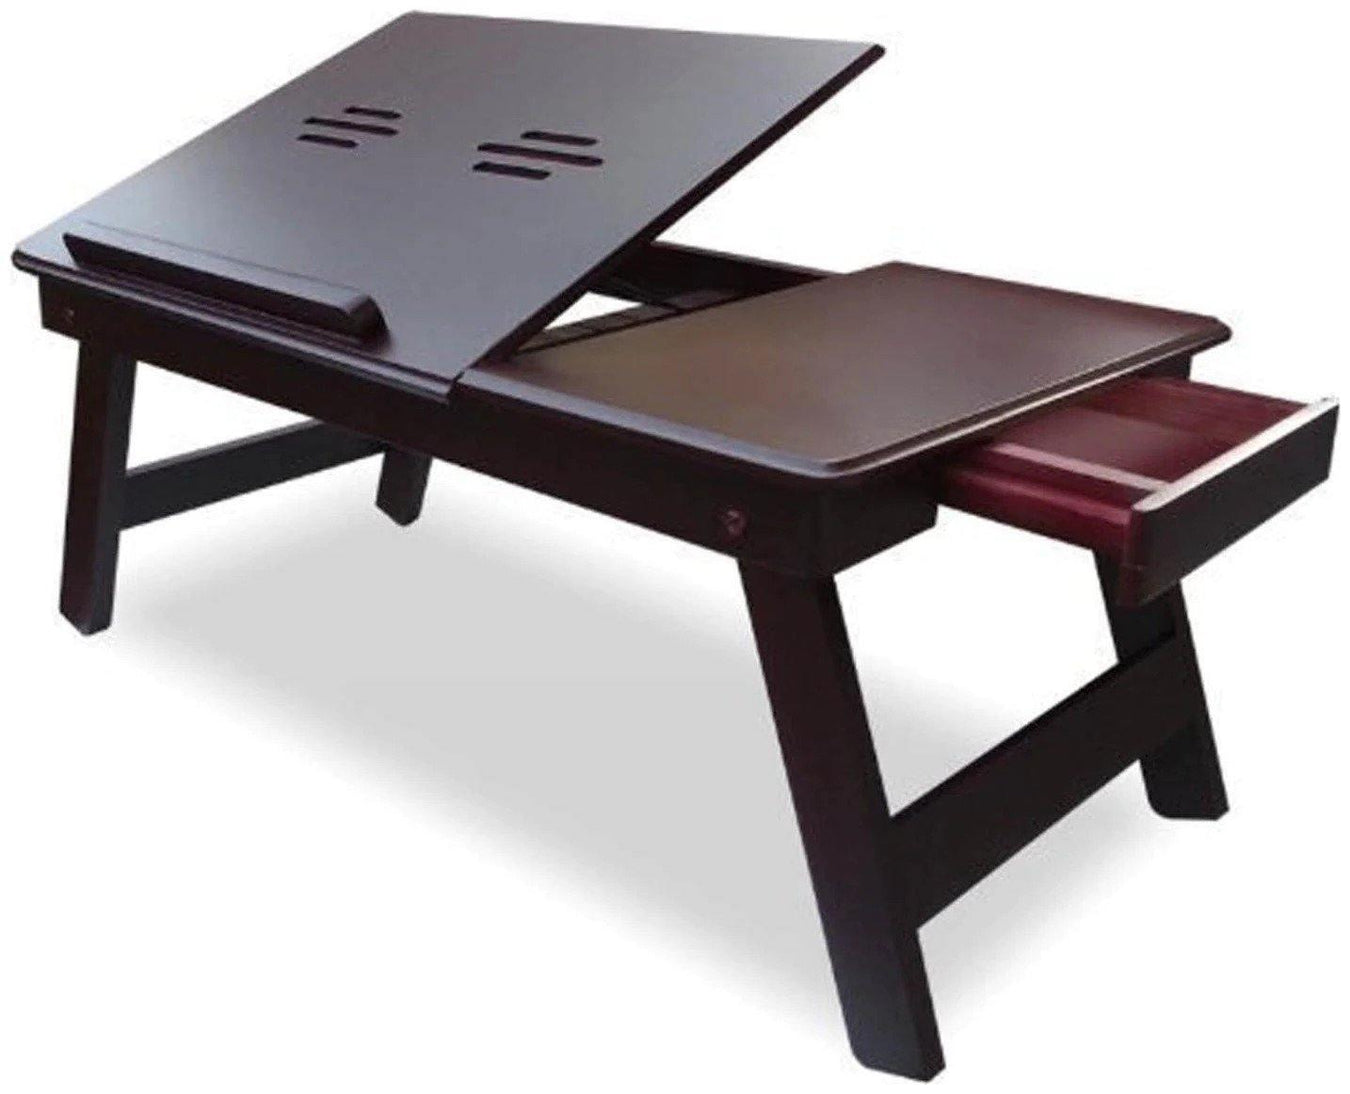 Laptop Tables - WoodenTwist